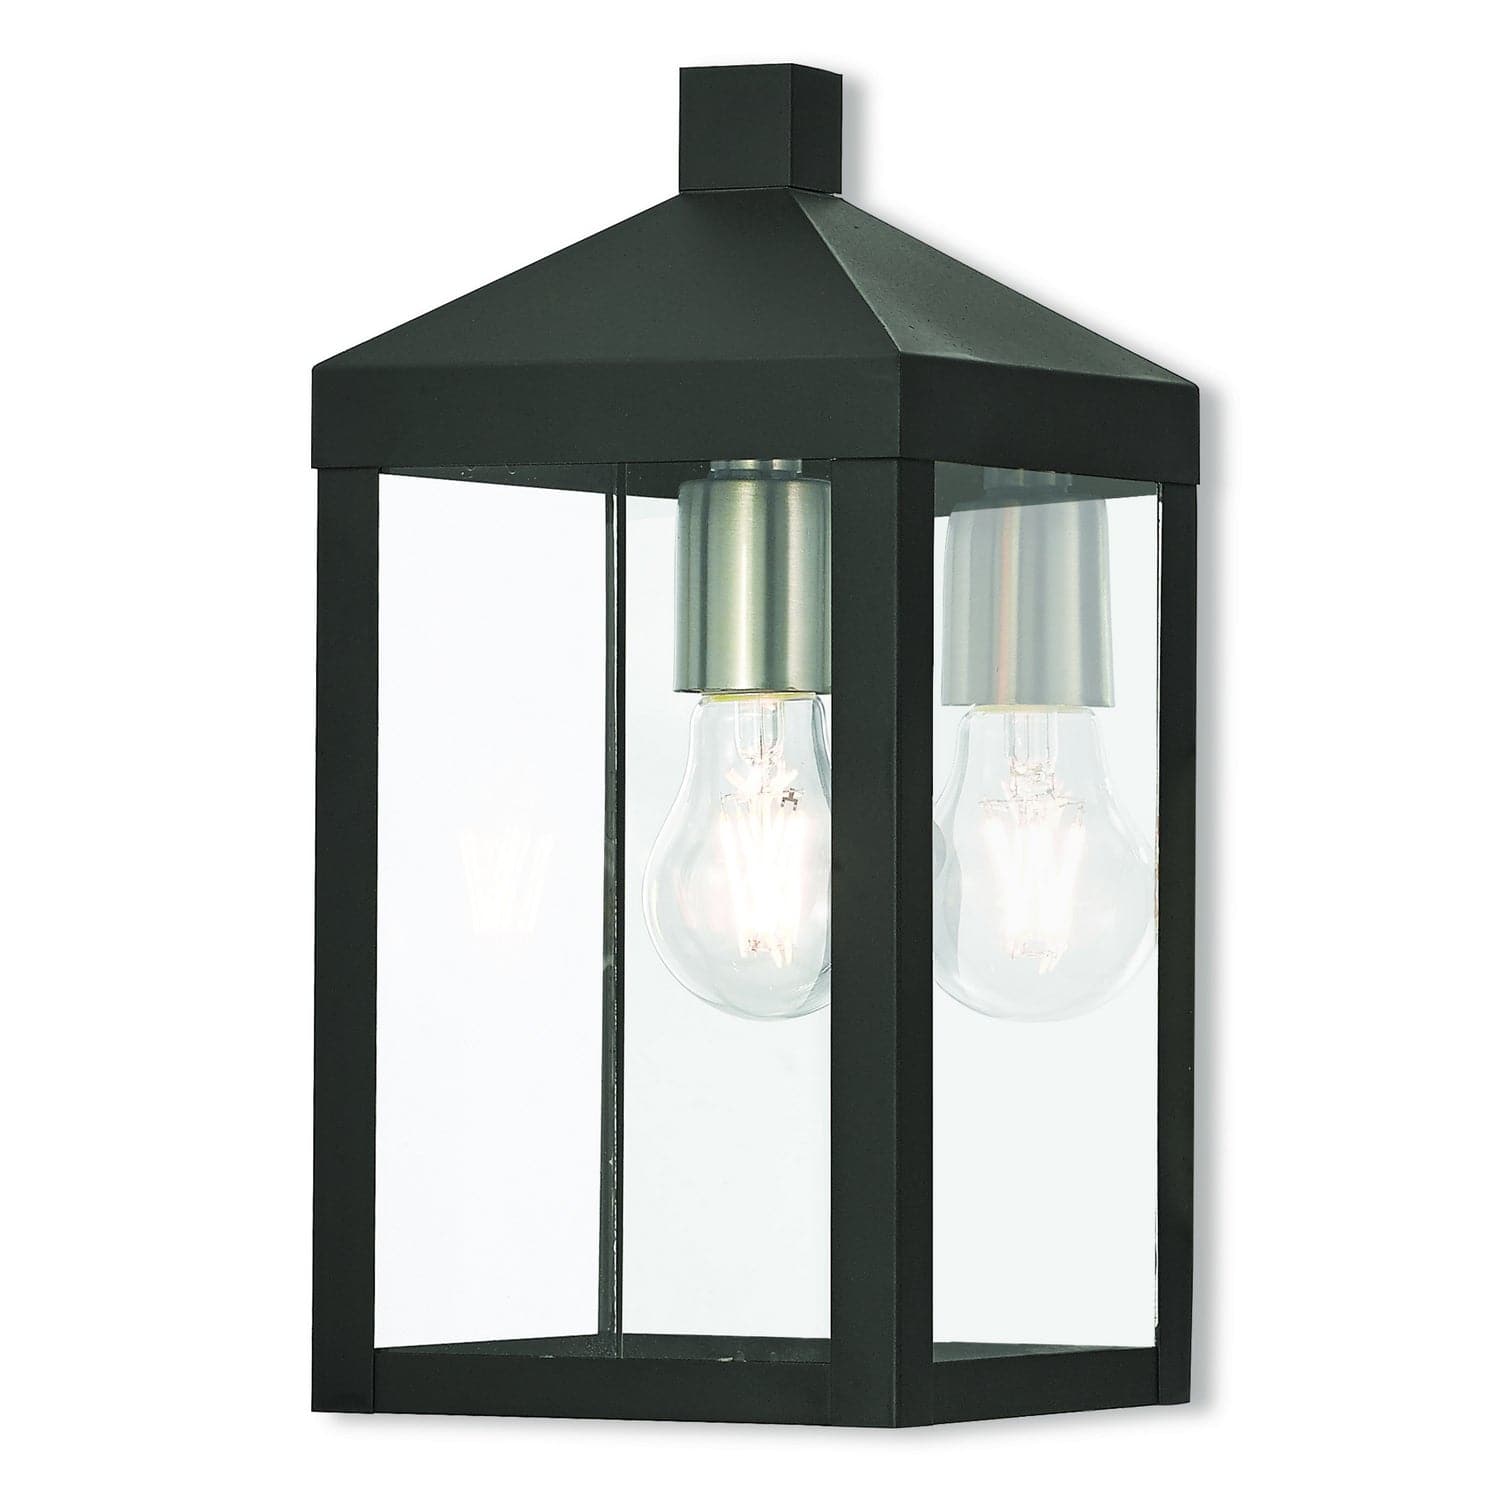 Livex Lighting - 20582-04 - One Light Outdoor Wall Lantern - Nyack - Black w/ Brushed Nickel Cluster and Polished Chrome Stainless Steel